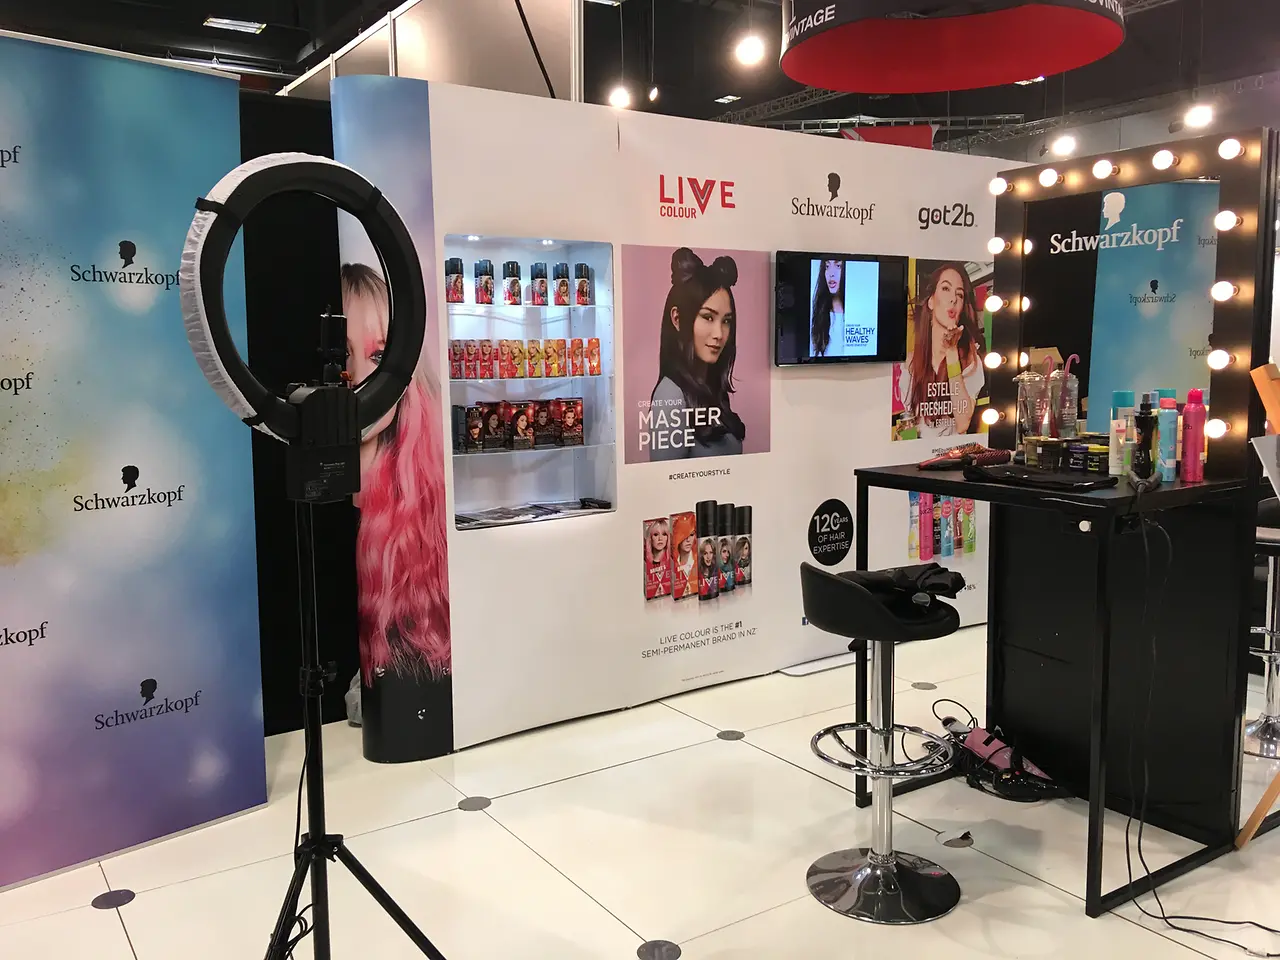 The Schwarzkopf showcase, which won the Best Health and Beauty Display award at Foodstuffs Expo 2018.